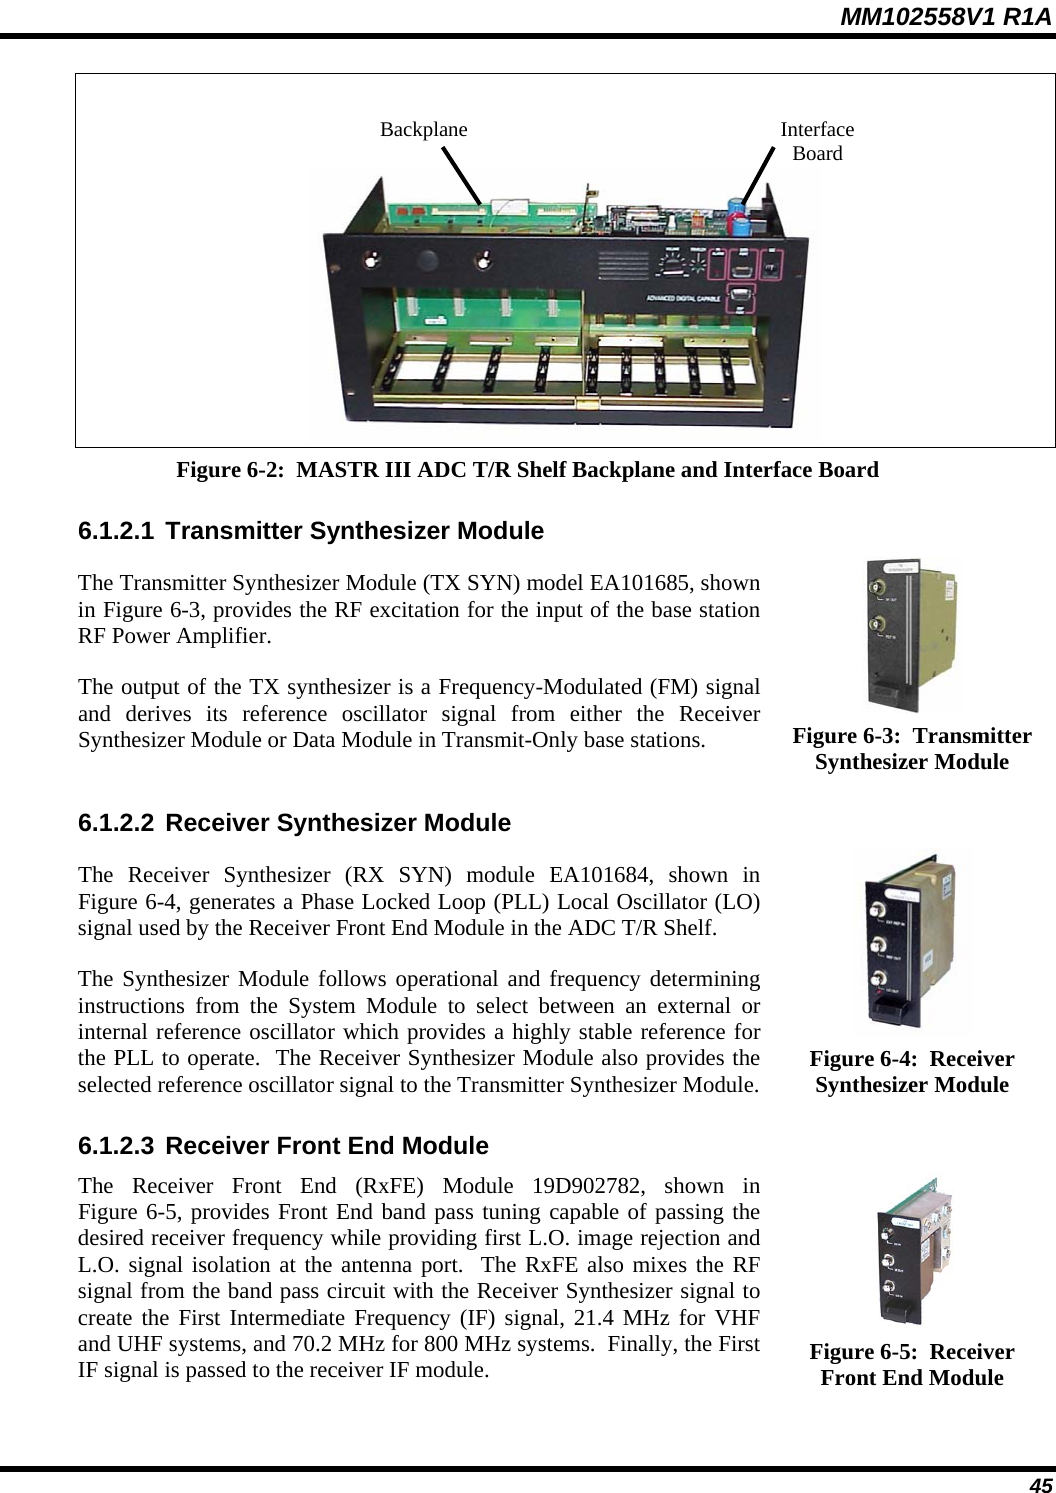 MM102558V1 R1A  Interface Board Backplane Figure 6-2:  MASTR III ADC T/R Shelf Backplane and Interface Board 6.1.2.1 Transmitter Synthesizer Module  The Transmitter Synthesizer Module (TX SYN) model EA101685, shown in Figure 6-3, provides the RF excitation for the input of the base station RF Power Amplifier. The output of the TX synthesizer is a Frequency-Modulated (FM) signal and derives its reference oscillator signal from either the Receiver Synthesizer Module or Data Module in Transmit-Only base stations.  Figure 6-3:  Transmitter Synthesizer Module 6.1.2.2 Receiver Synthesizer Module  The Receiver Synthesizer (RX SYN) module EA101684, shown in Figure 6-4, generates a Phase Locked Loop (PLL) Local Oscillator (LO) signal used by the Receiver Front End Module in the ADC T/R Shelf. The Synthesizer Module follows operational and frequency determining instructions from the System Module to select between an external or internal reference oscillator which provides a highly stable reference for the PLL to operate.  The Receiver Synthesizer Module also provides the selected reference oscillator signal to the Transmitter Synthesizer Module.  Figure 6-4:  Receiver Synthesizer Module 6.1.2.3 Receiver Front End Module  The Receiver Front End (RxFE) Module 19D902782, shown in Figure 6-5, provides Front End band pass tuning capable of passing the desired receiver frequency while providing first L.O. image rejection and L.O. signal isolation at the antenna port.  The RxFE also mixes the RF signal from the band pass circuit with the Receiver Synthesizer signal to create the First Intermediate Frequency (IF) signal, 21.4 MHz for VHF and UHF systems, and 70.2 MHz for 800 MHz systems.  Finally, the First IF signal is passed to the receiver IF module.  Figure 6-5:  Receiver Front End Module  45 